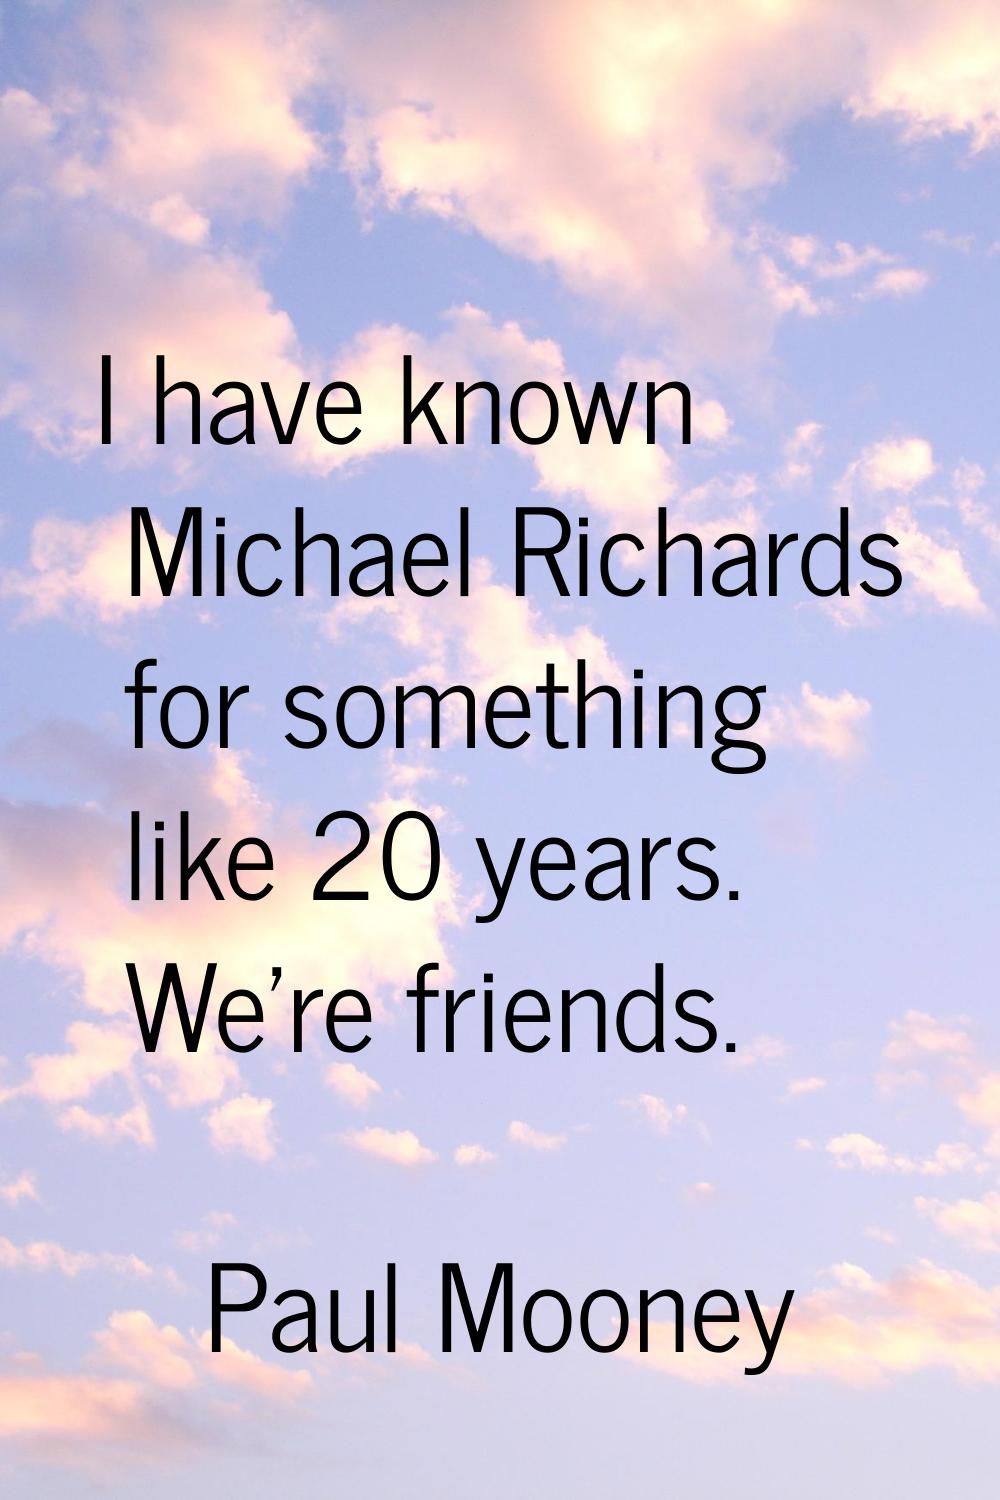 I have known Michael Richards for something like 20 years. We're friends.